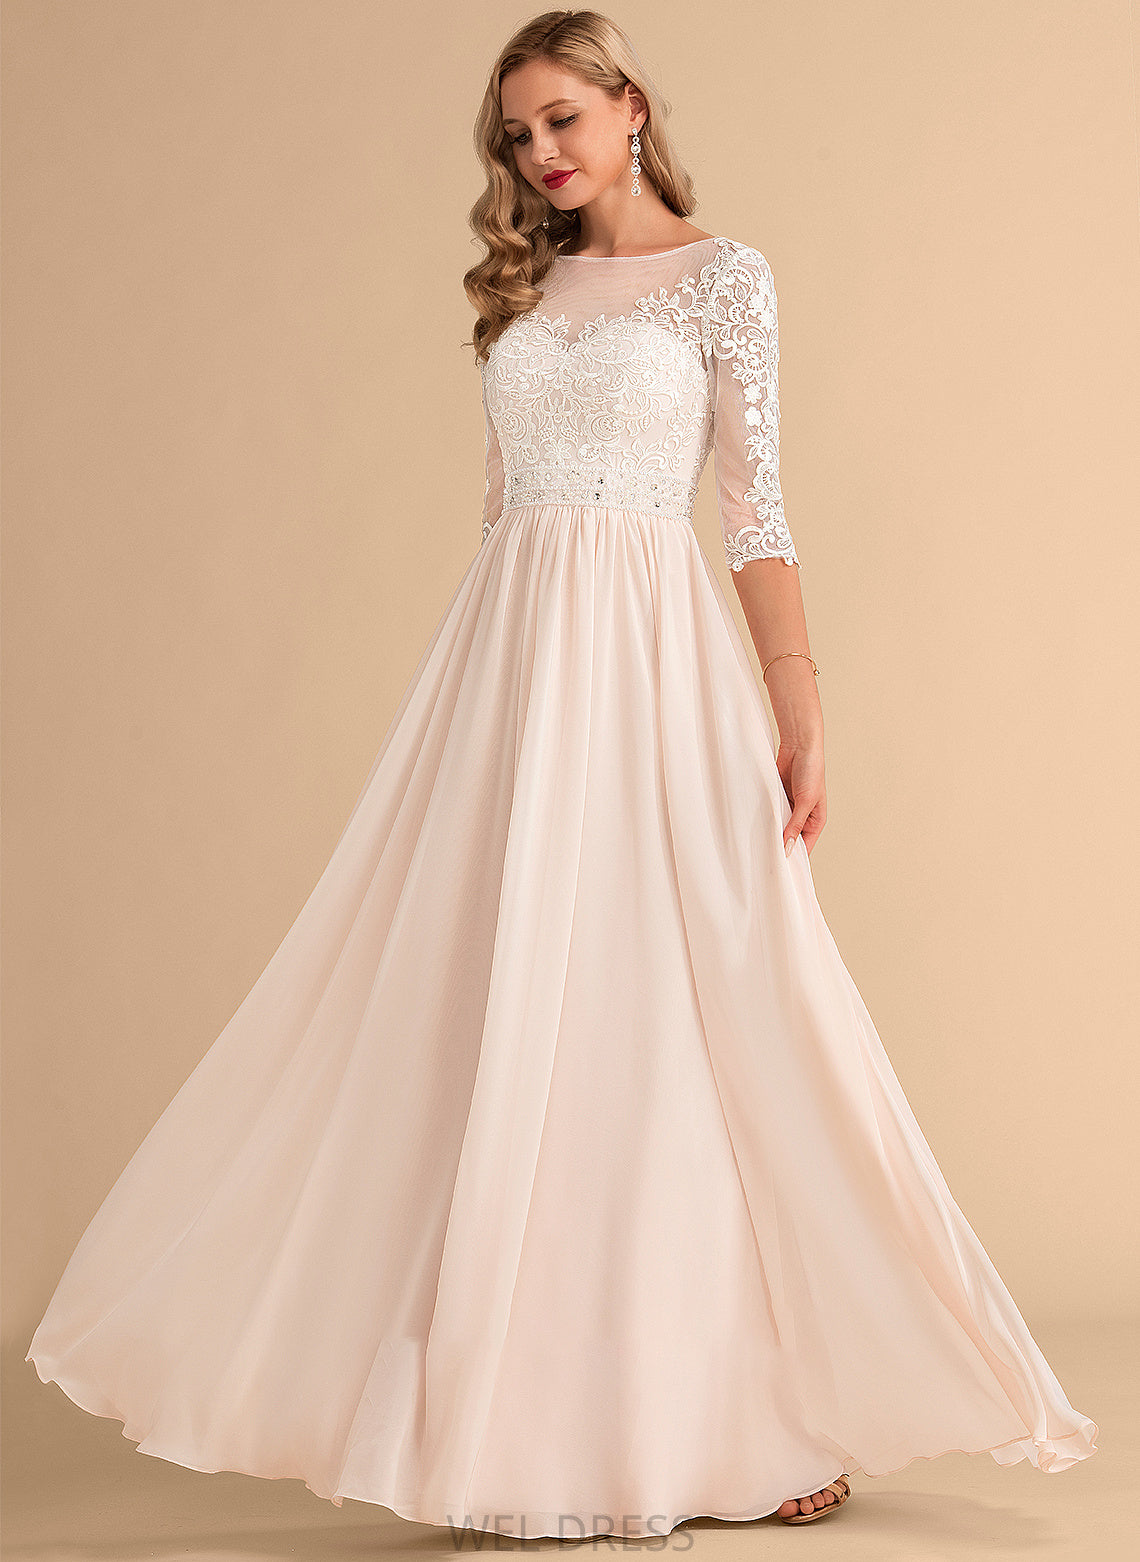 Wedding Penny A-Line Illusion Floor-Length With Wedding Dresses Sequins Beading Lace Chiffon Dress